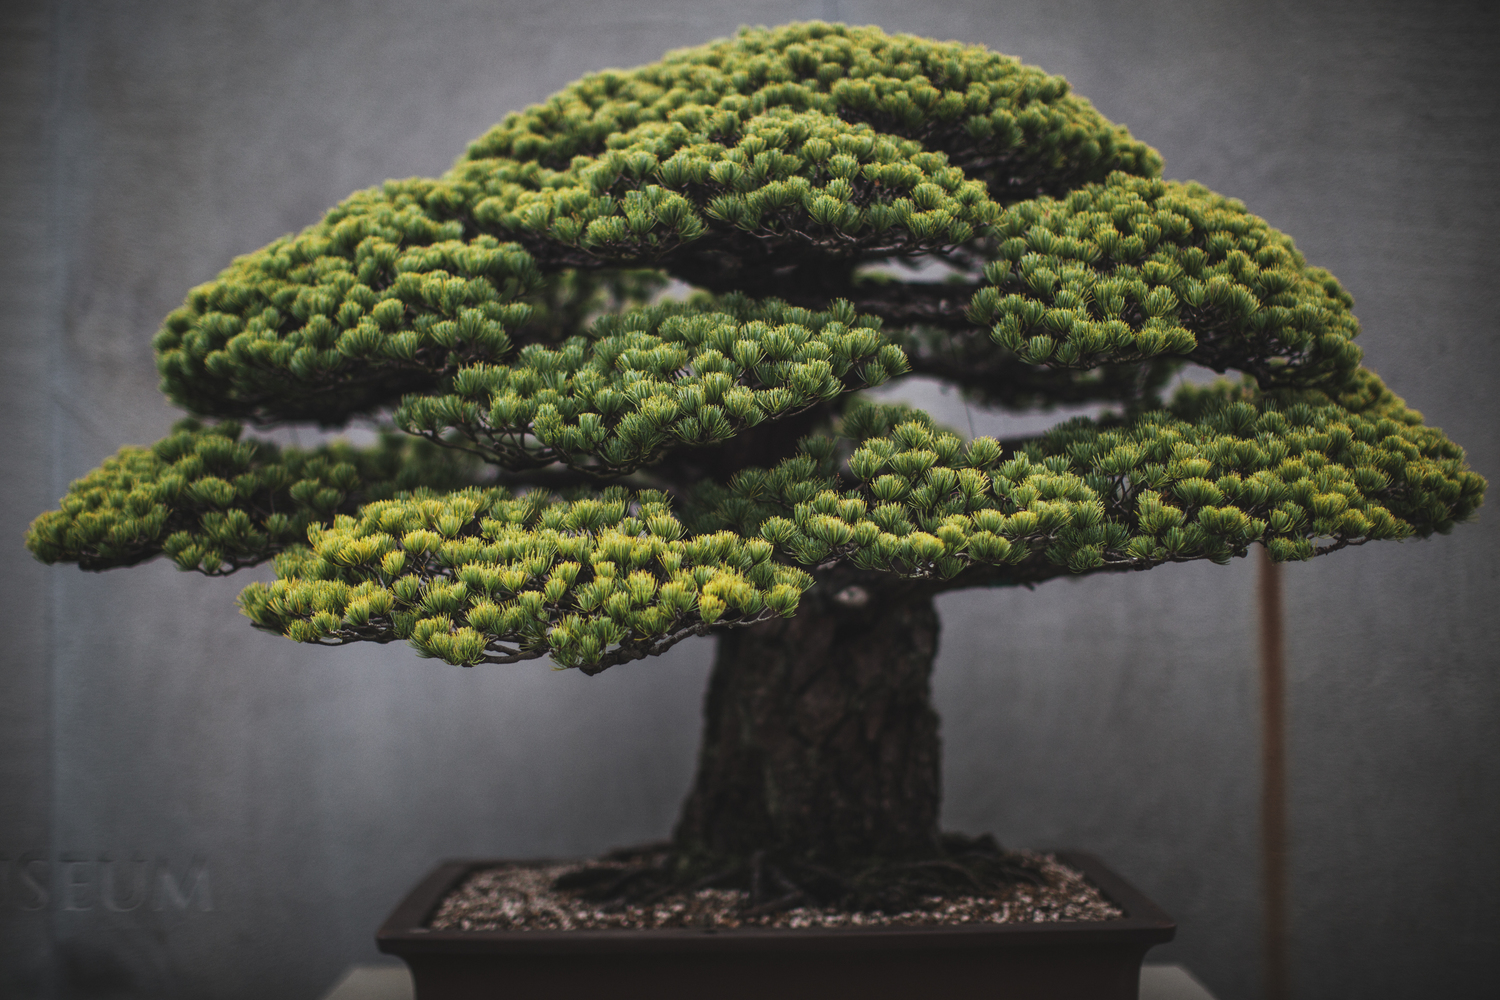 a new Bonsai photo book + photo of Japanese White Pine that survived Hiroshima ?format=1500w